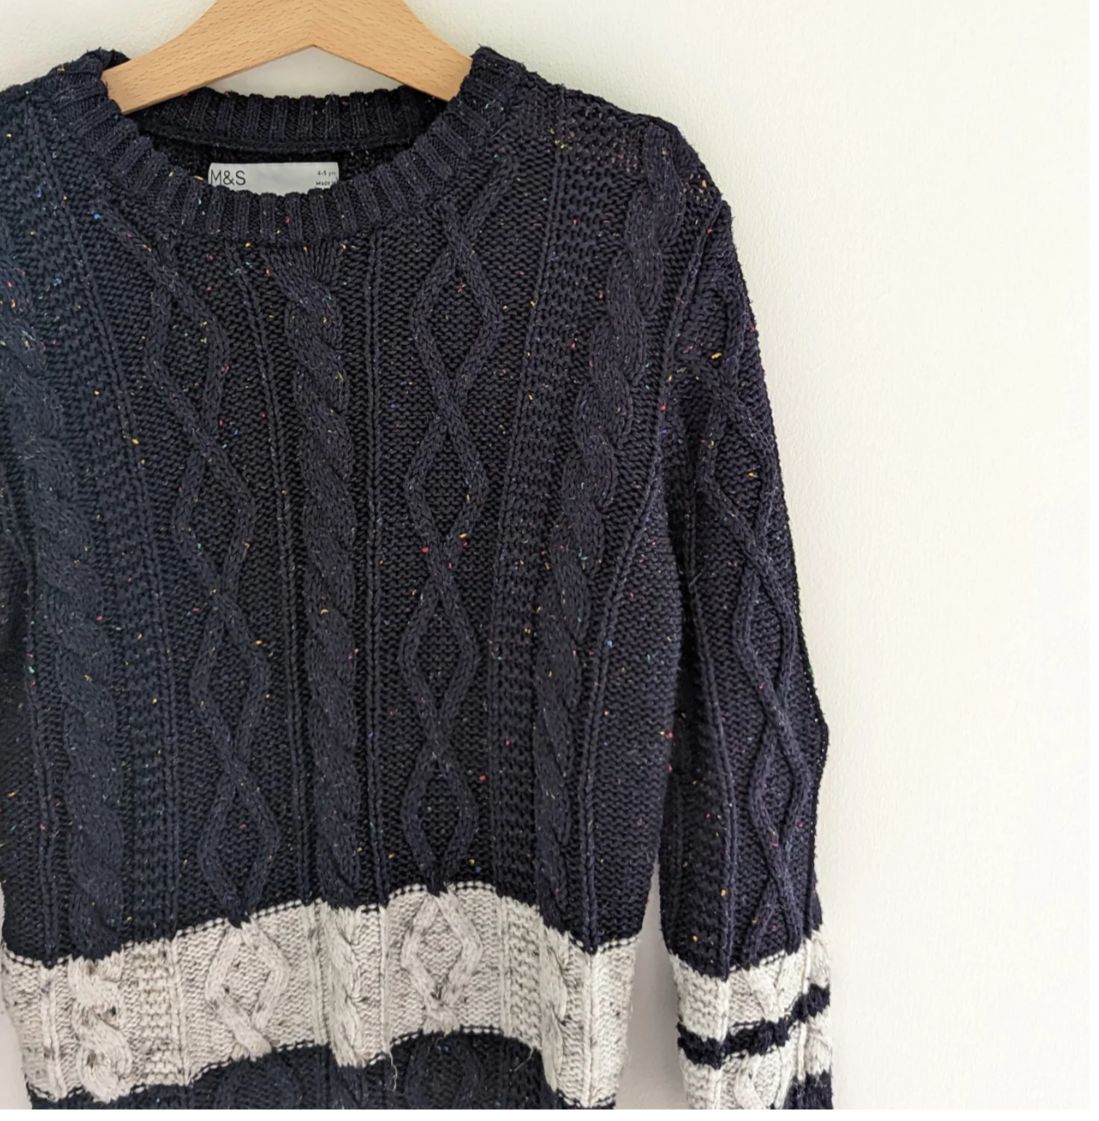 Marks and spencer knitted sweater